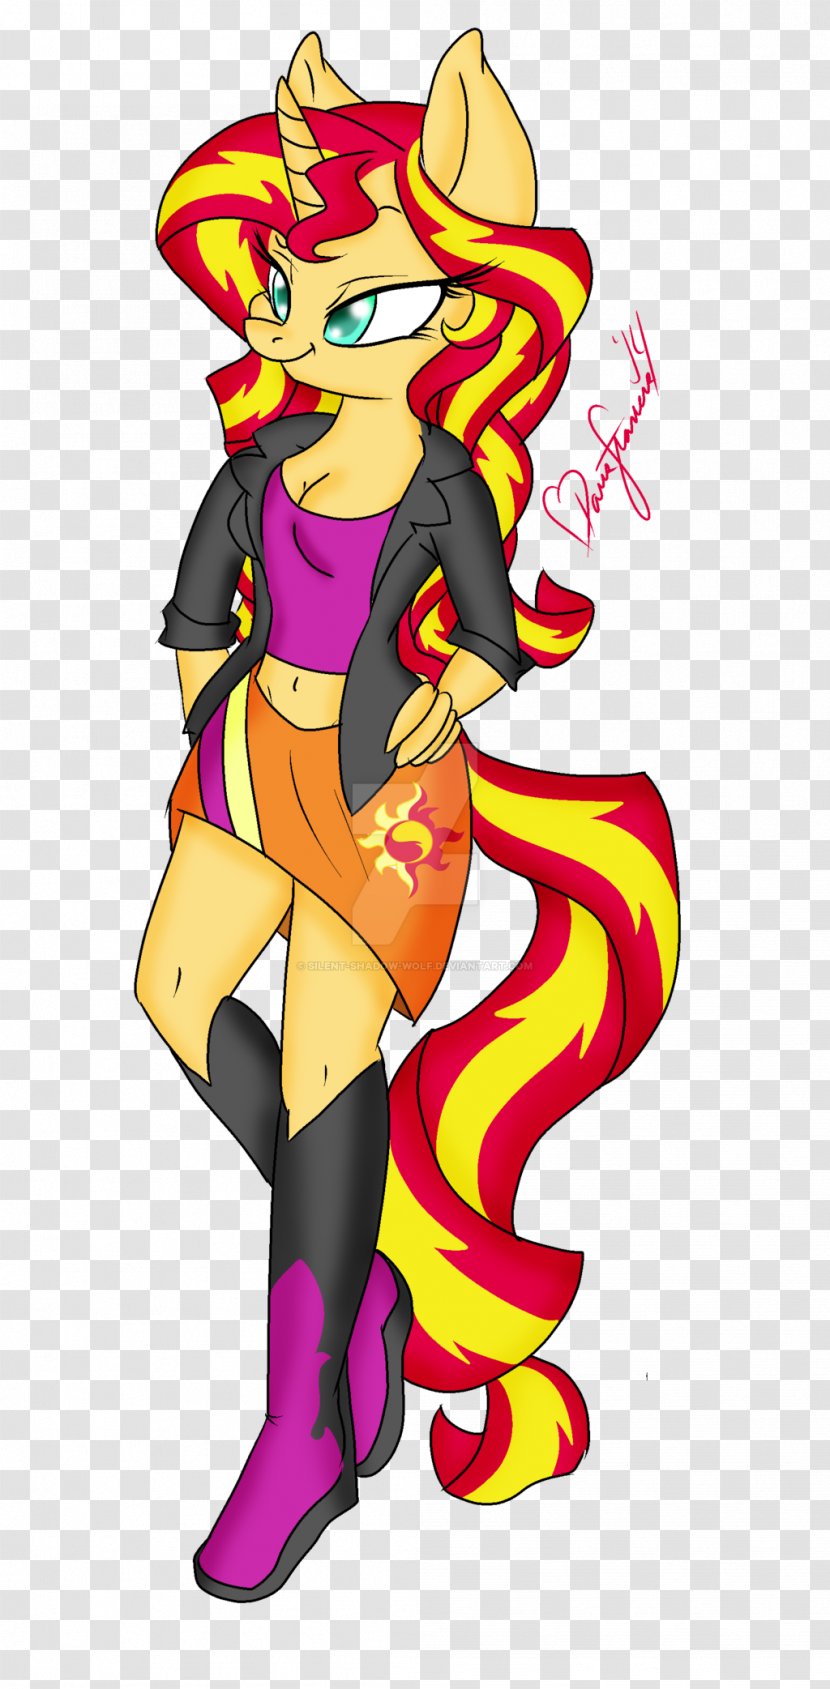 Sunset Shimmer Twilight Sparkle Fluttershy Rainbow Dash Pony - My Little Friendship Is Magic - Fat Equestria Girls Transparent PNG